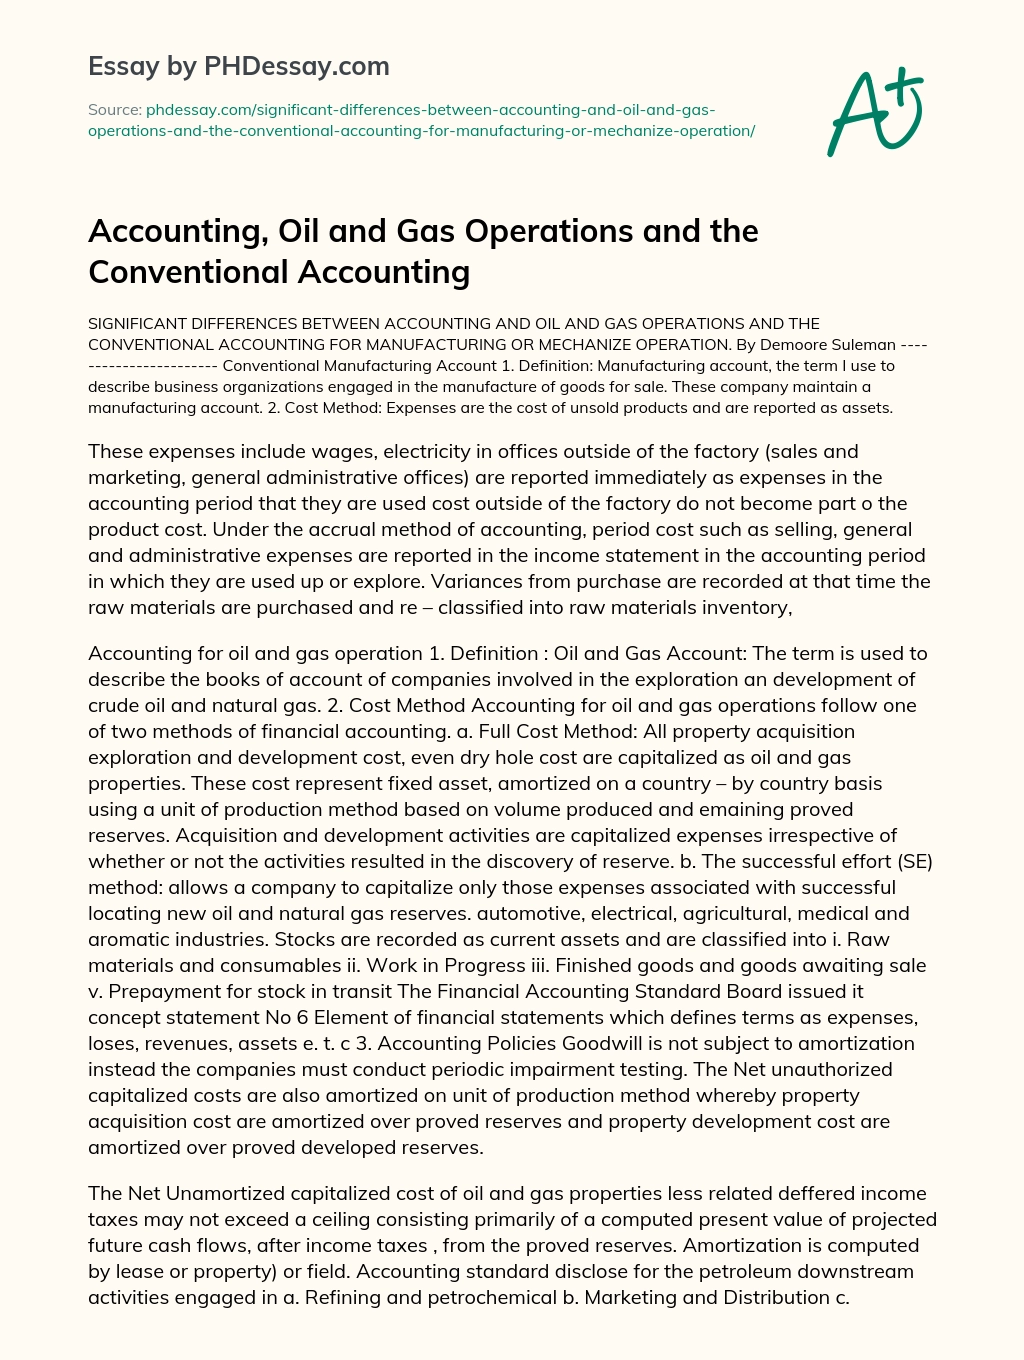 Accounting, Oil and Gas Operations and the Conventional Accounting essay